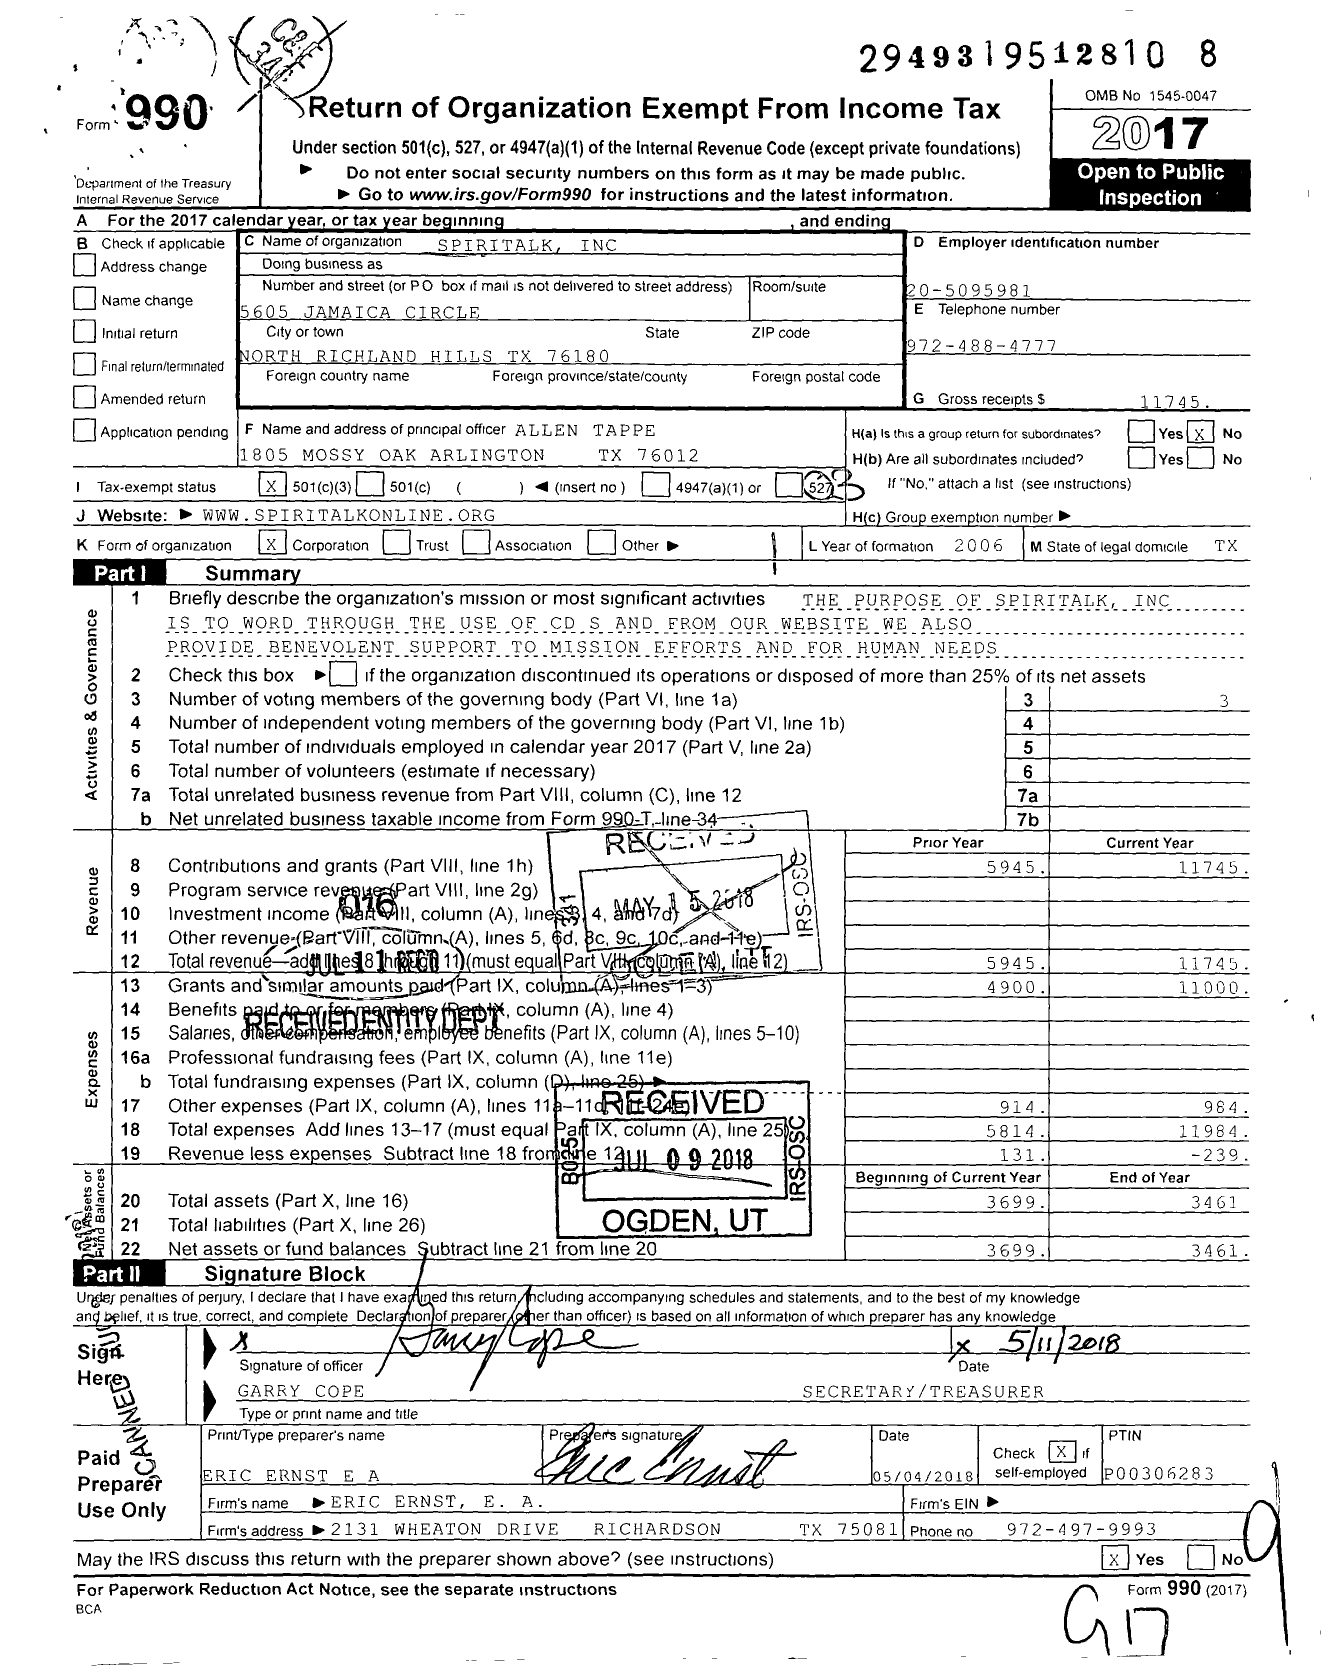 Image of first page of 2017 Form 990 for Spiritalk